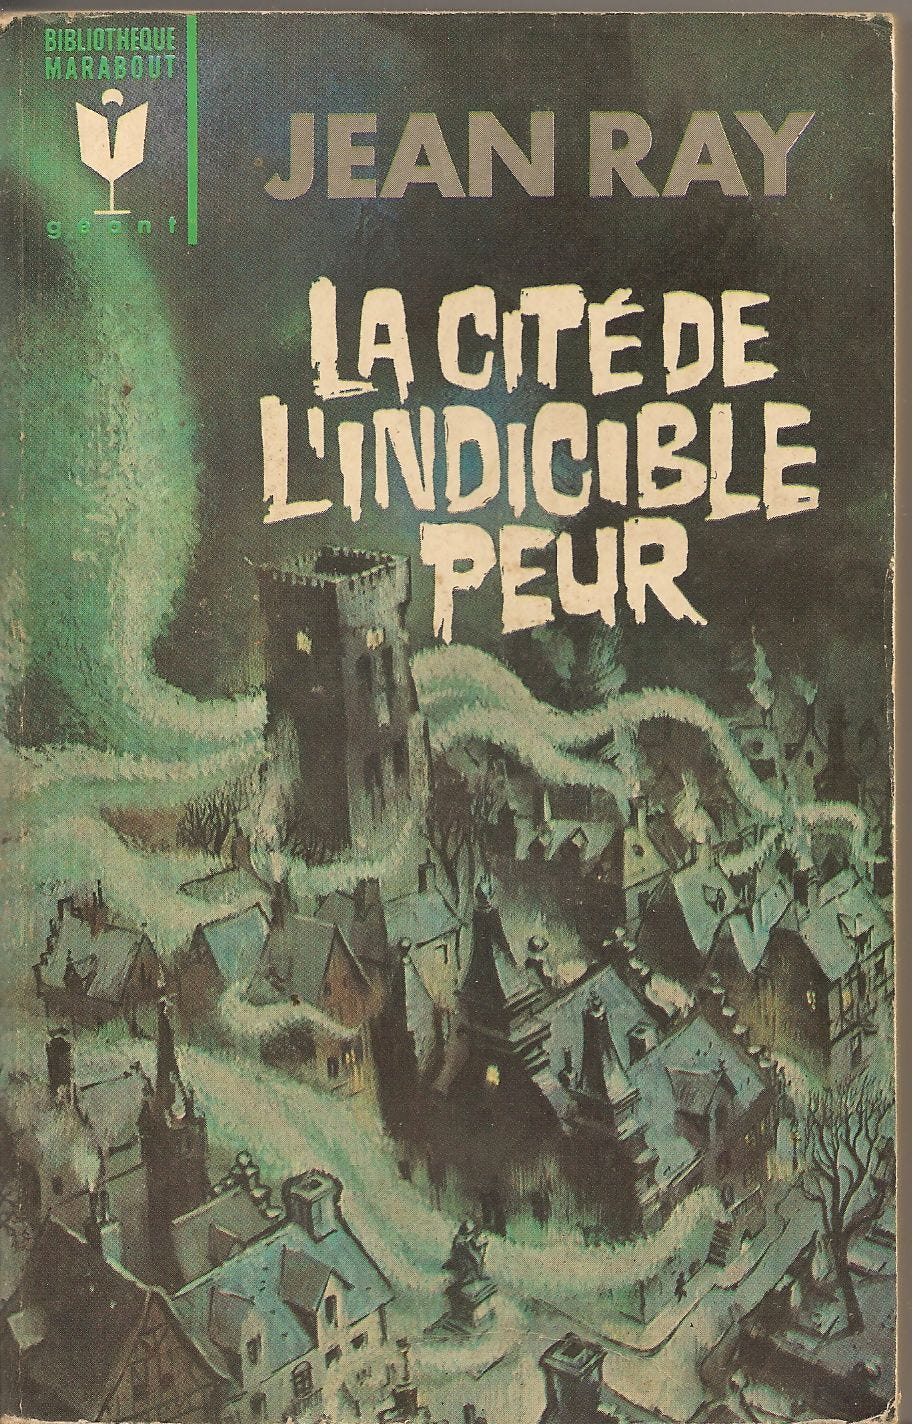 The cover of the books depicts a ghostly fog engulfing a village of pointy roof.